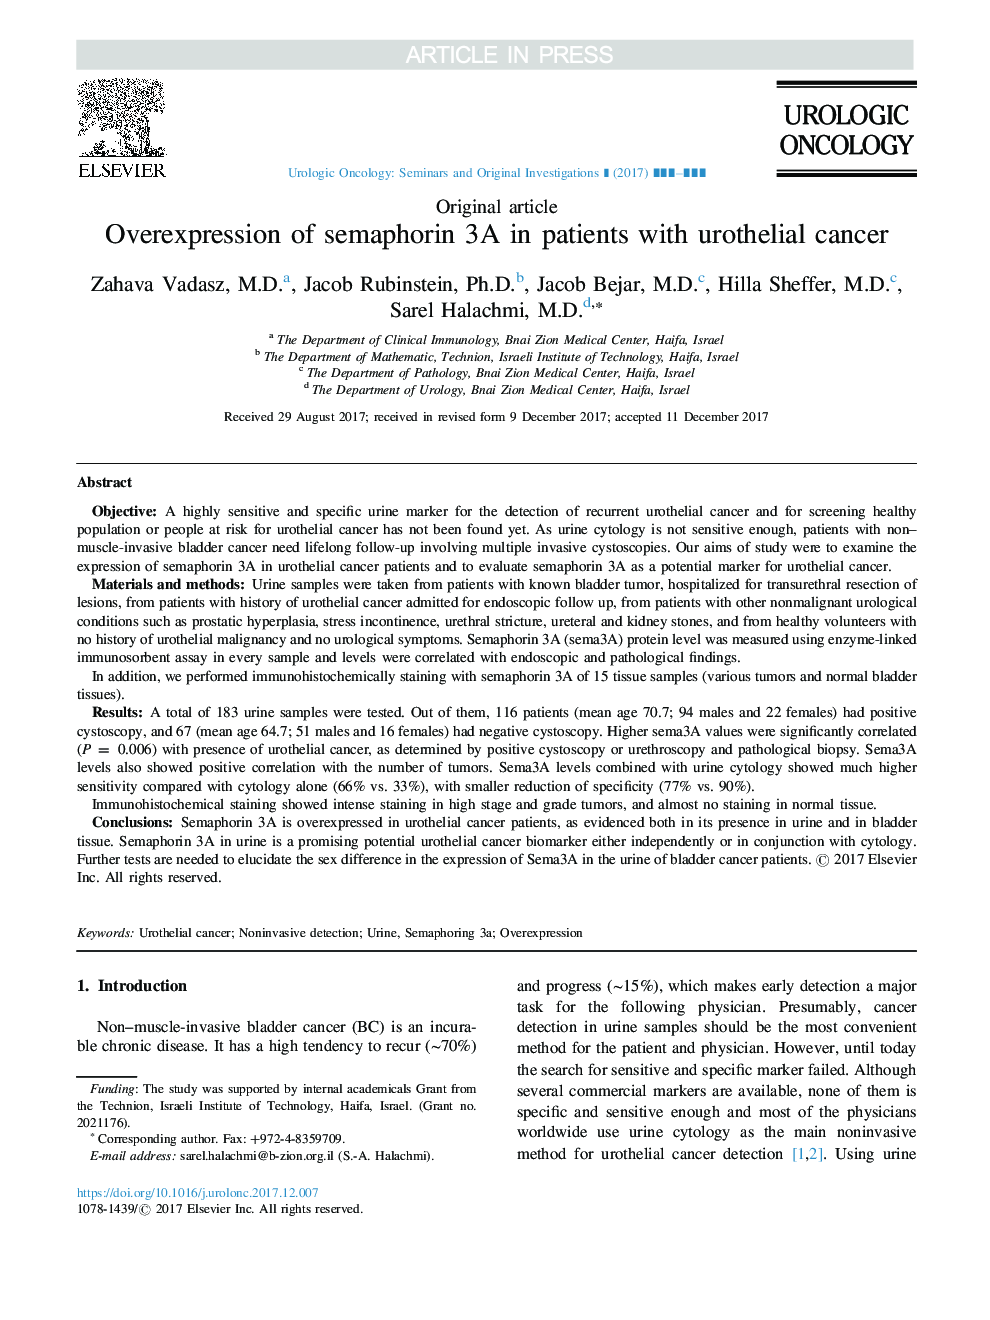 Overexpression of semaphorin 3A in patients with urothelial cancer